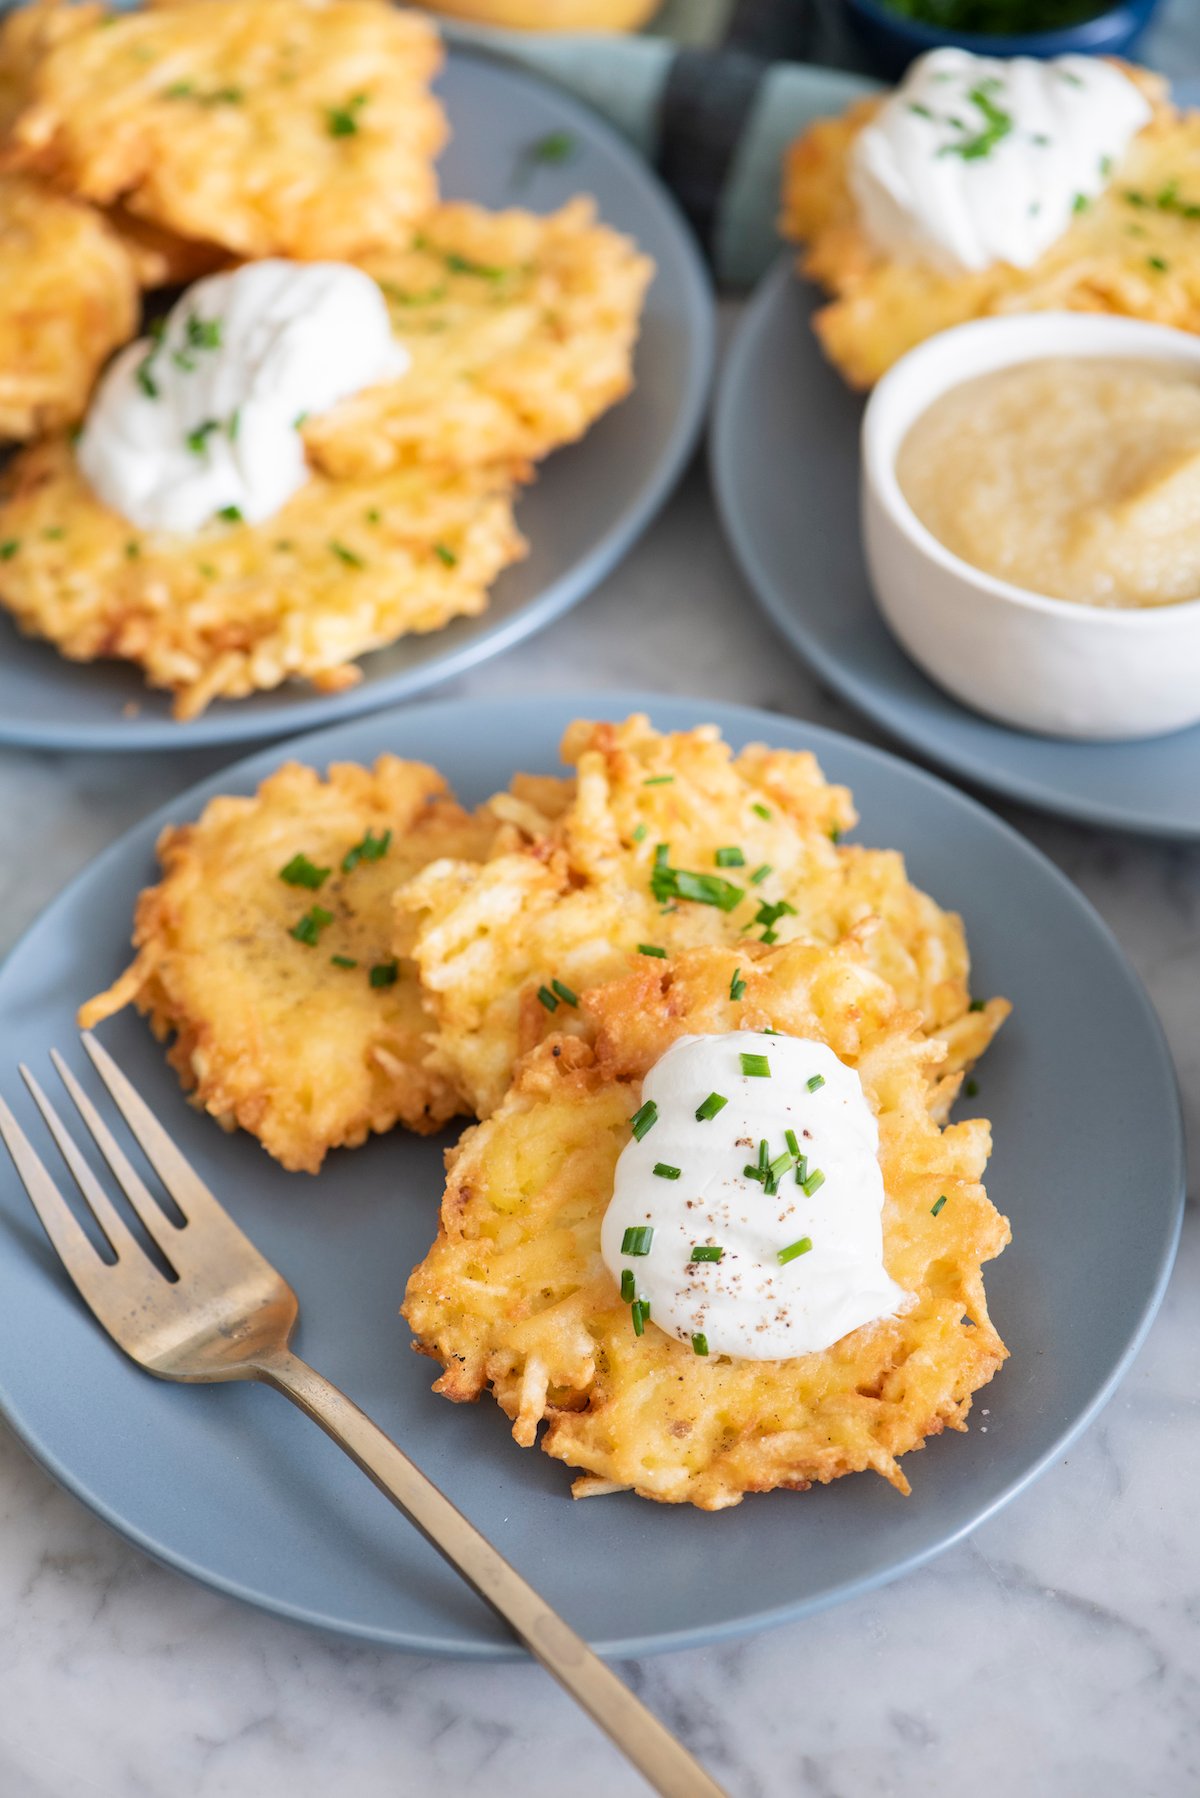 Potato Latkes on blue plate topped with sour cream and chives.